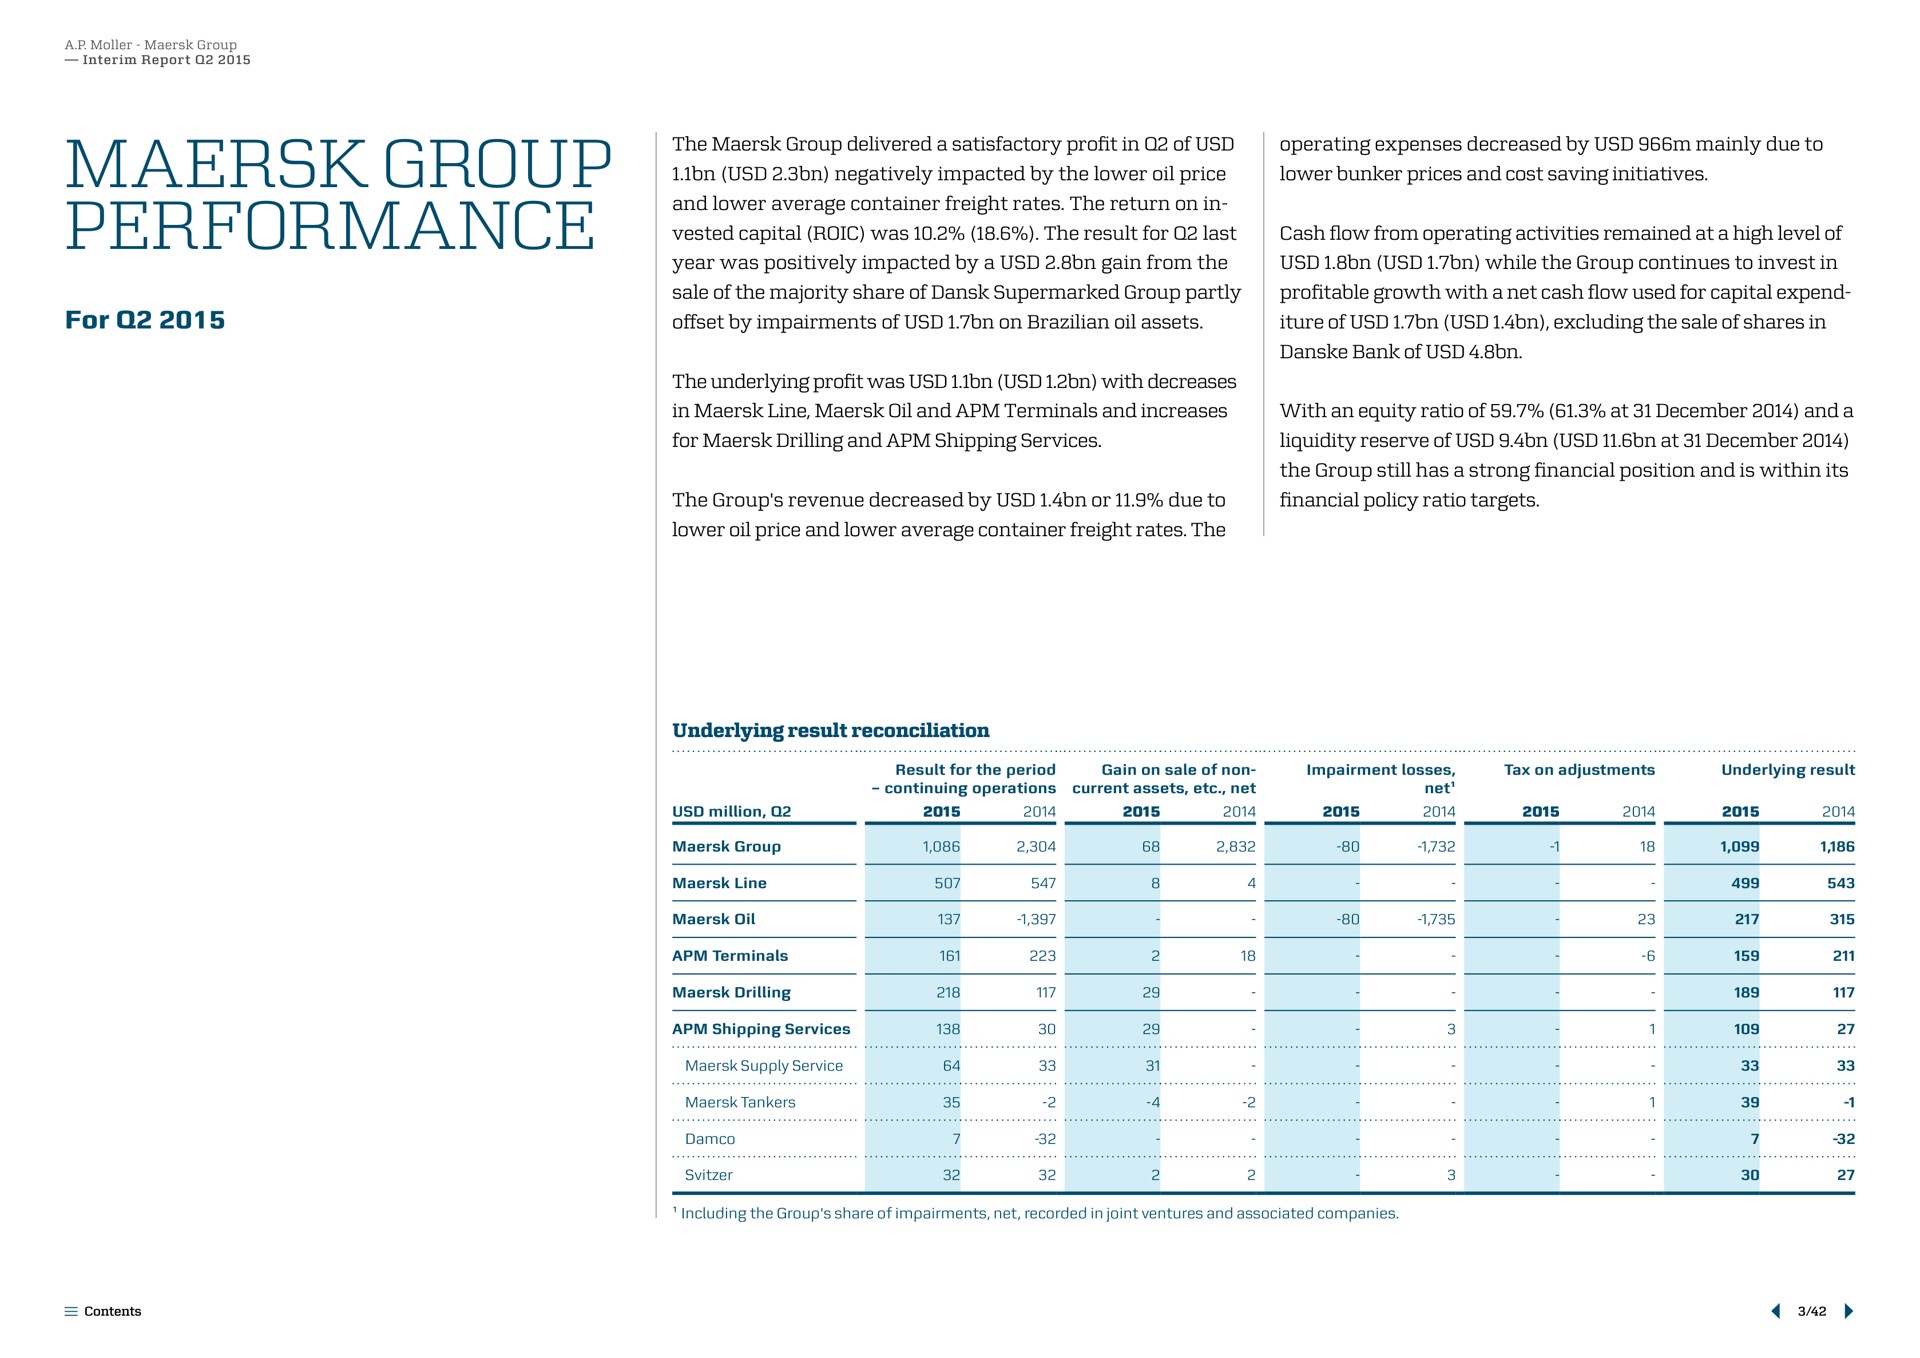 group performance for negatively impacted by the lower oil price lower bunker prices and cost saving initiatives year was positively impacted by a gain from the cash flow from operating activities remained at a high level of offset by impairments of on oil assets the underlying profit was with decreases in line oil and terminals and increases the still has a strong financial position and is within its underlying result reconciliation | Maersk